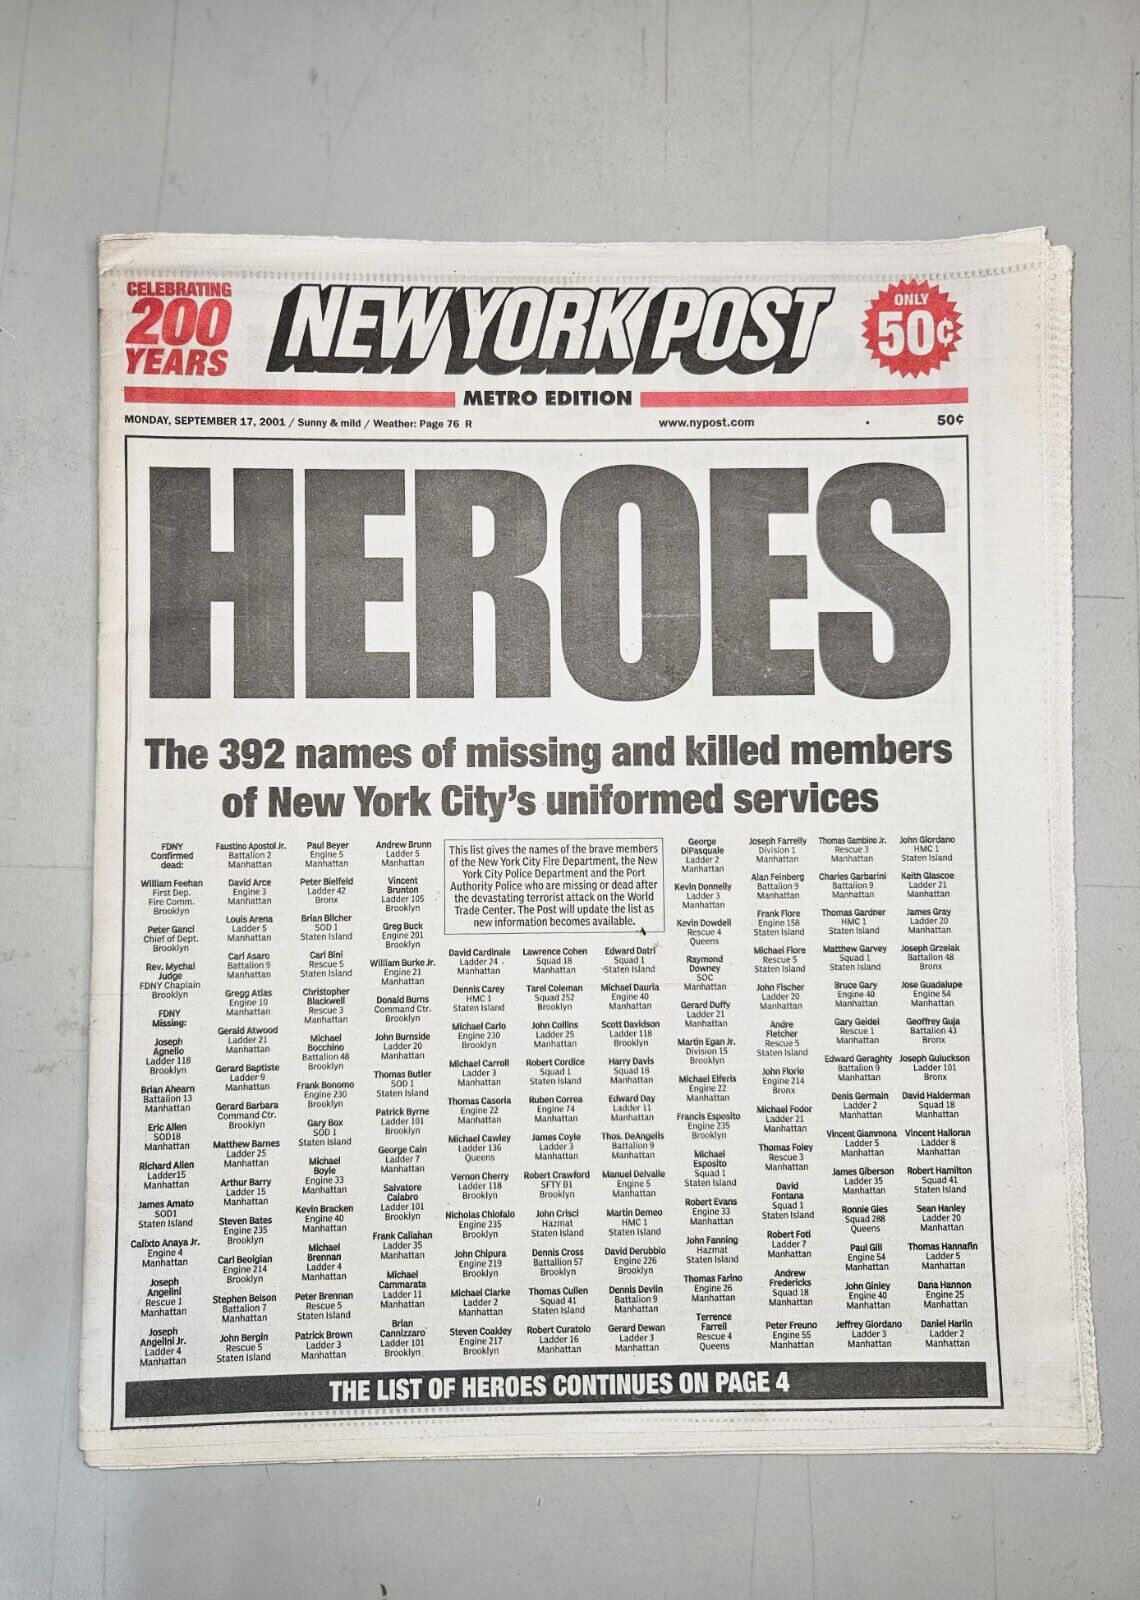 HEROES Tribute to 911 Servicemen New York Post September 17th, 2001, COMPLETE